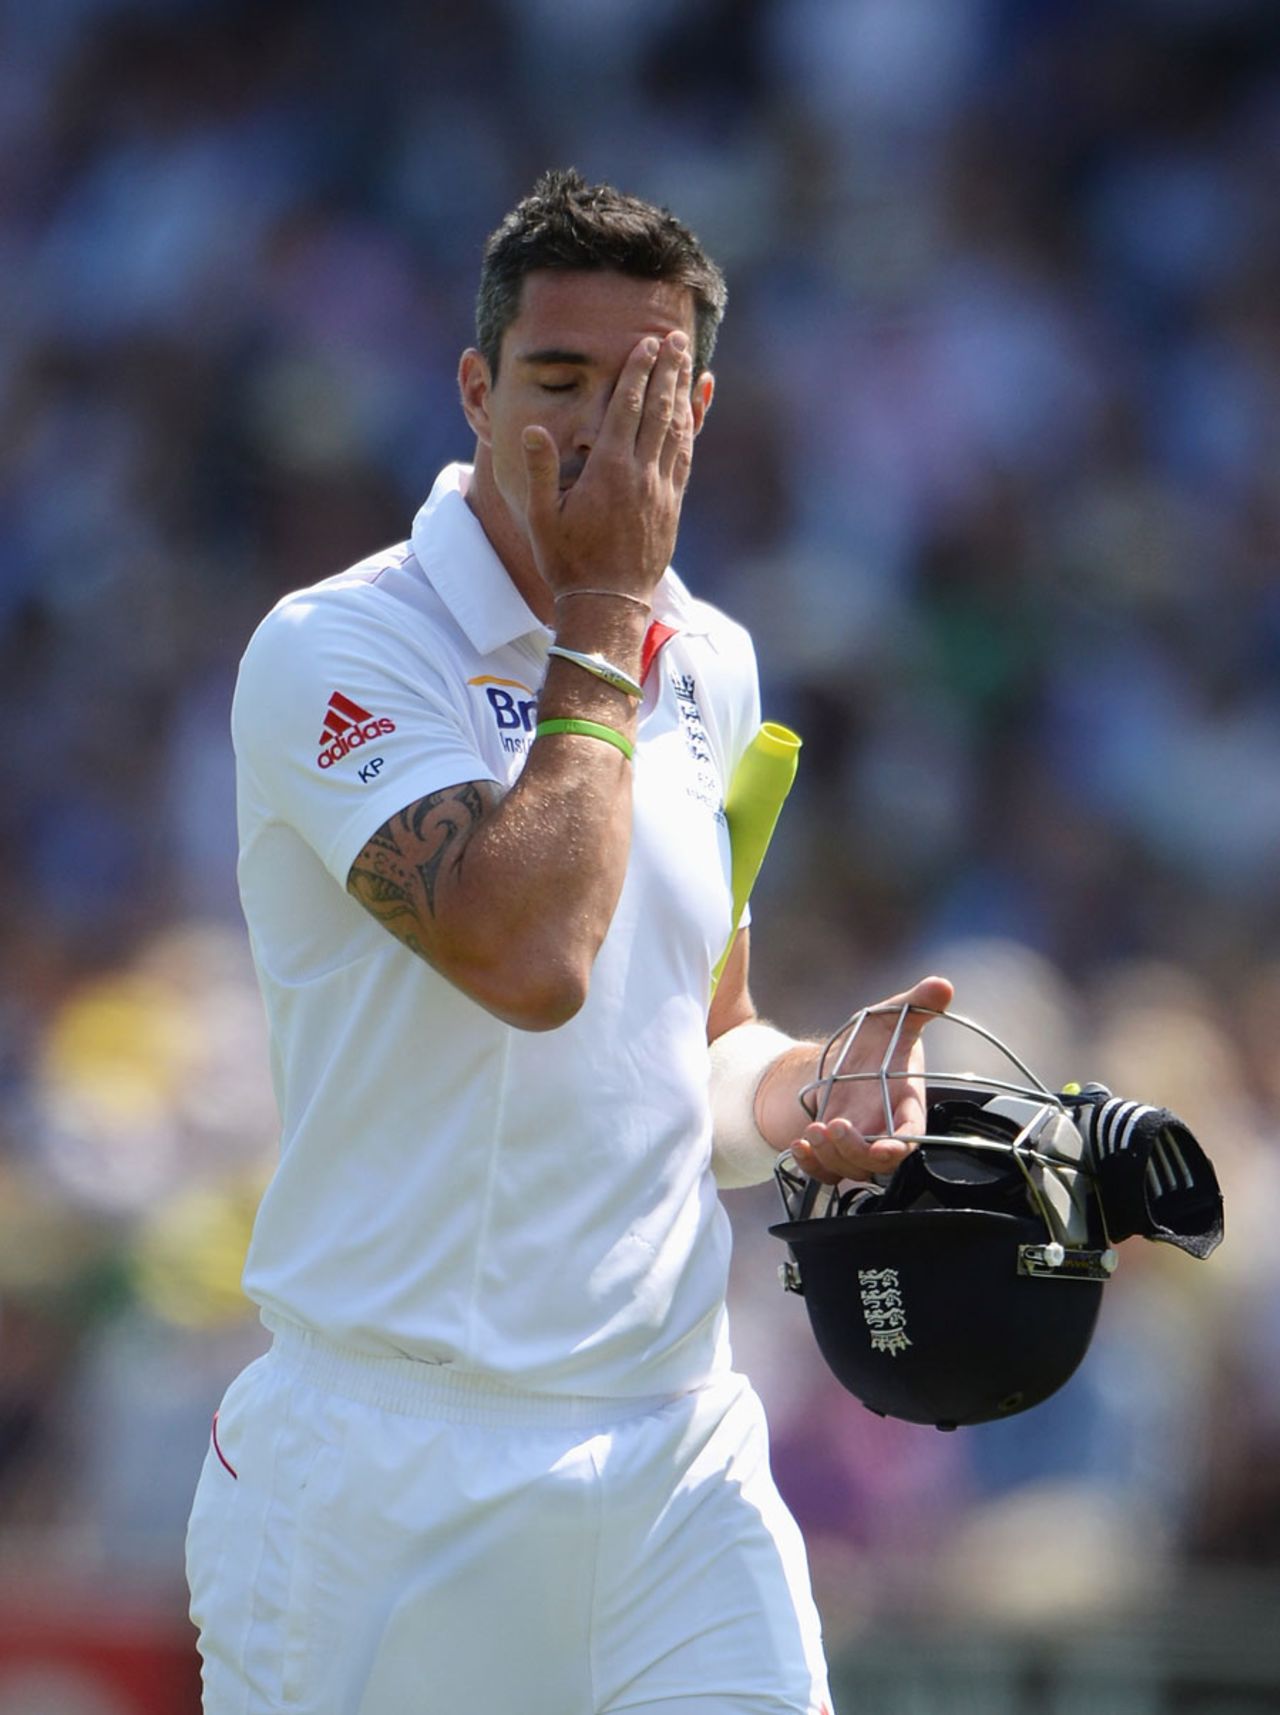 Kevin Pietersen walks off after a failure, England v Australia, 2nd Investec Ashes Test, Lord's, 1st day, July 18, 2013